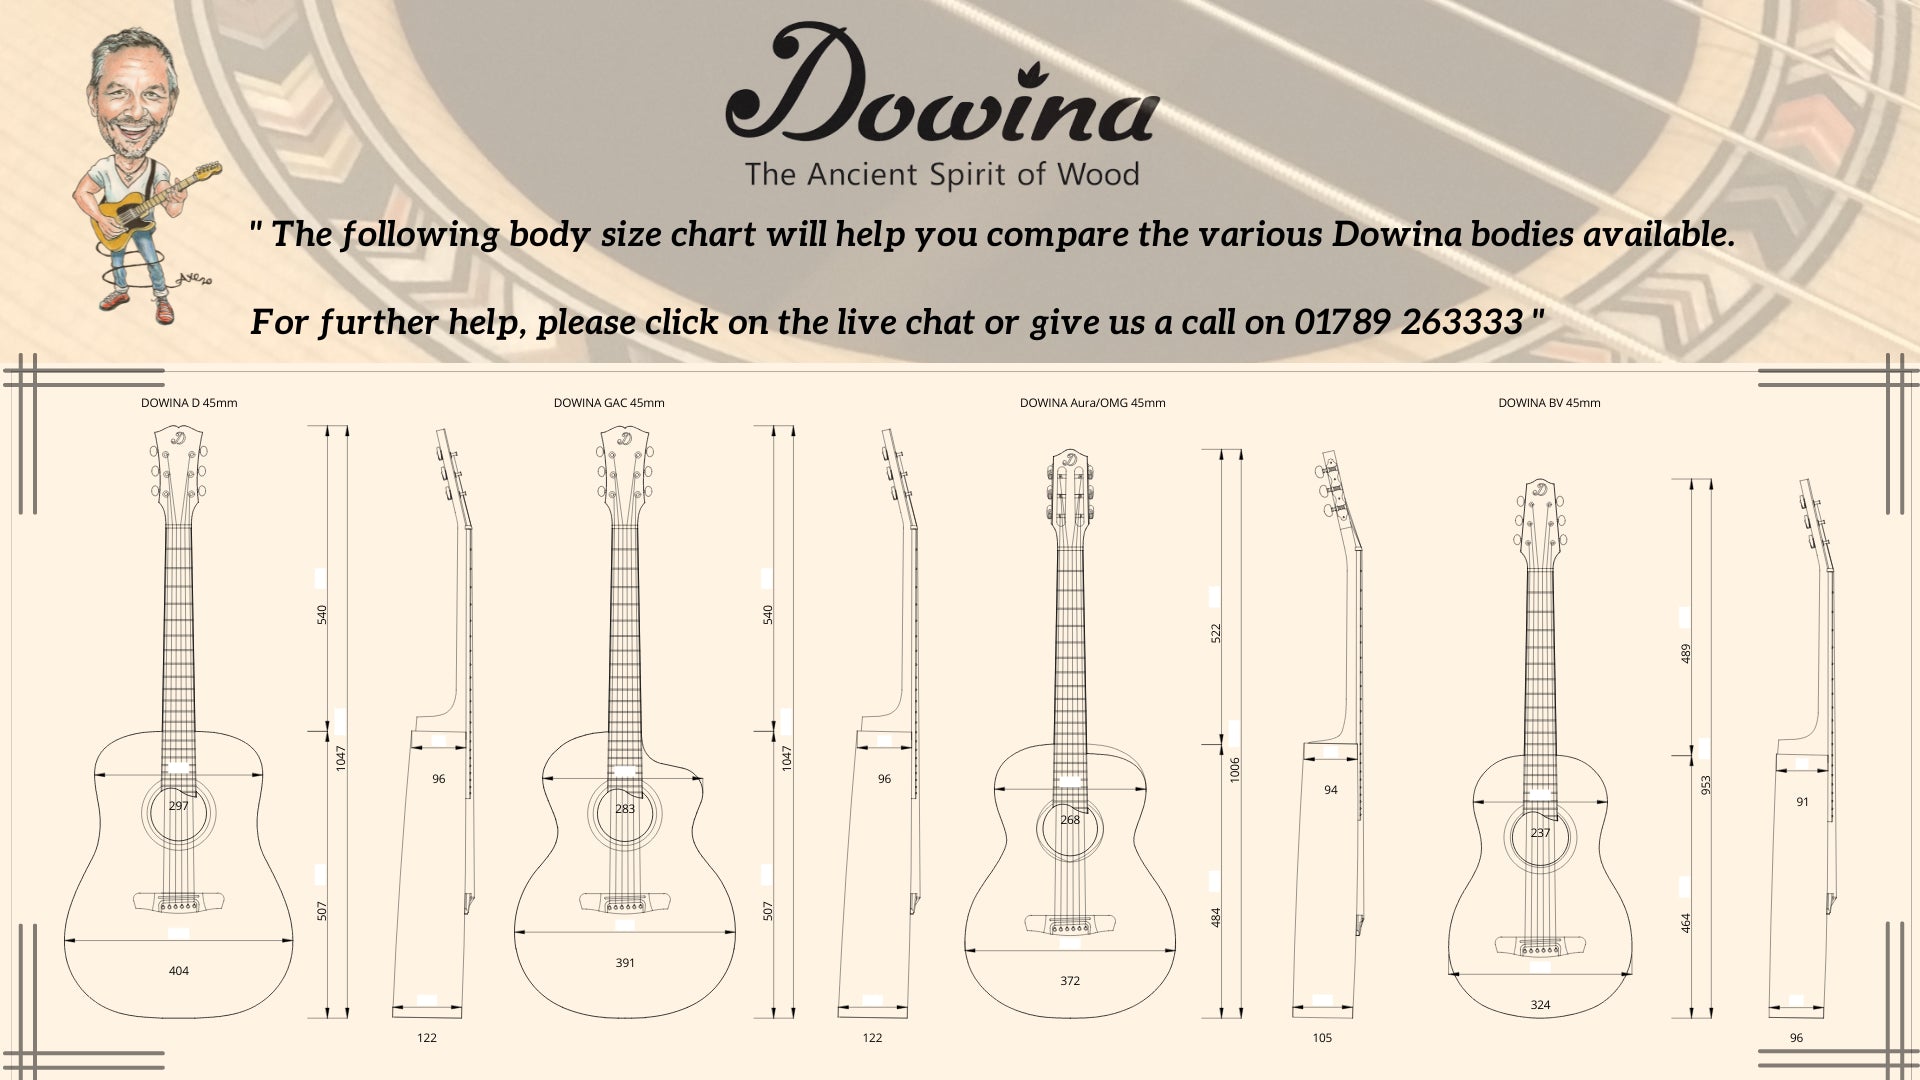 Dowina Rosewood / Maple / Rosewood Trio Plate (Amber Road) With Dolomite Spruce Top, Acoustic Guitar for sale at Richards Guitars.